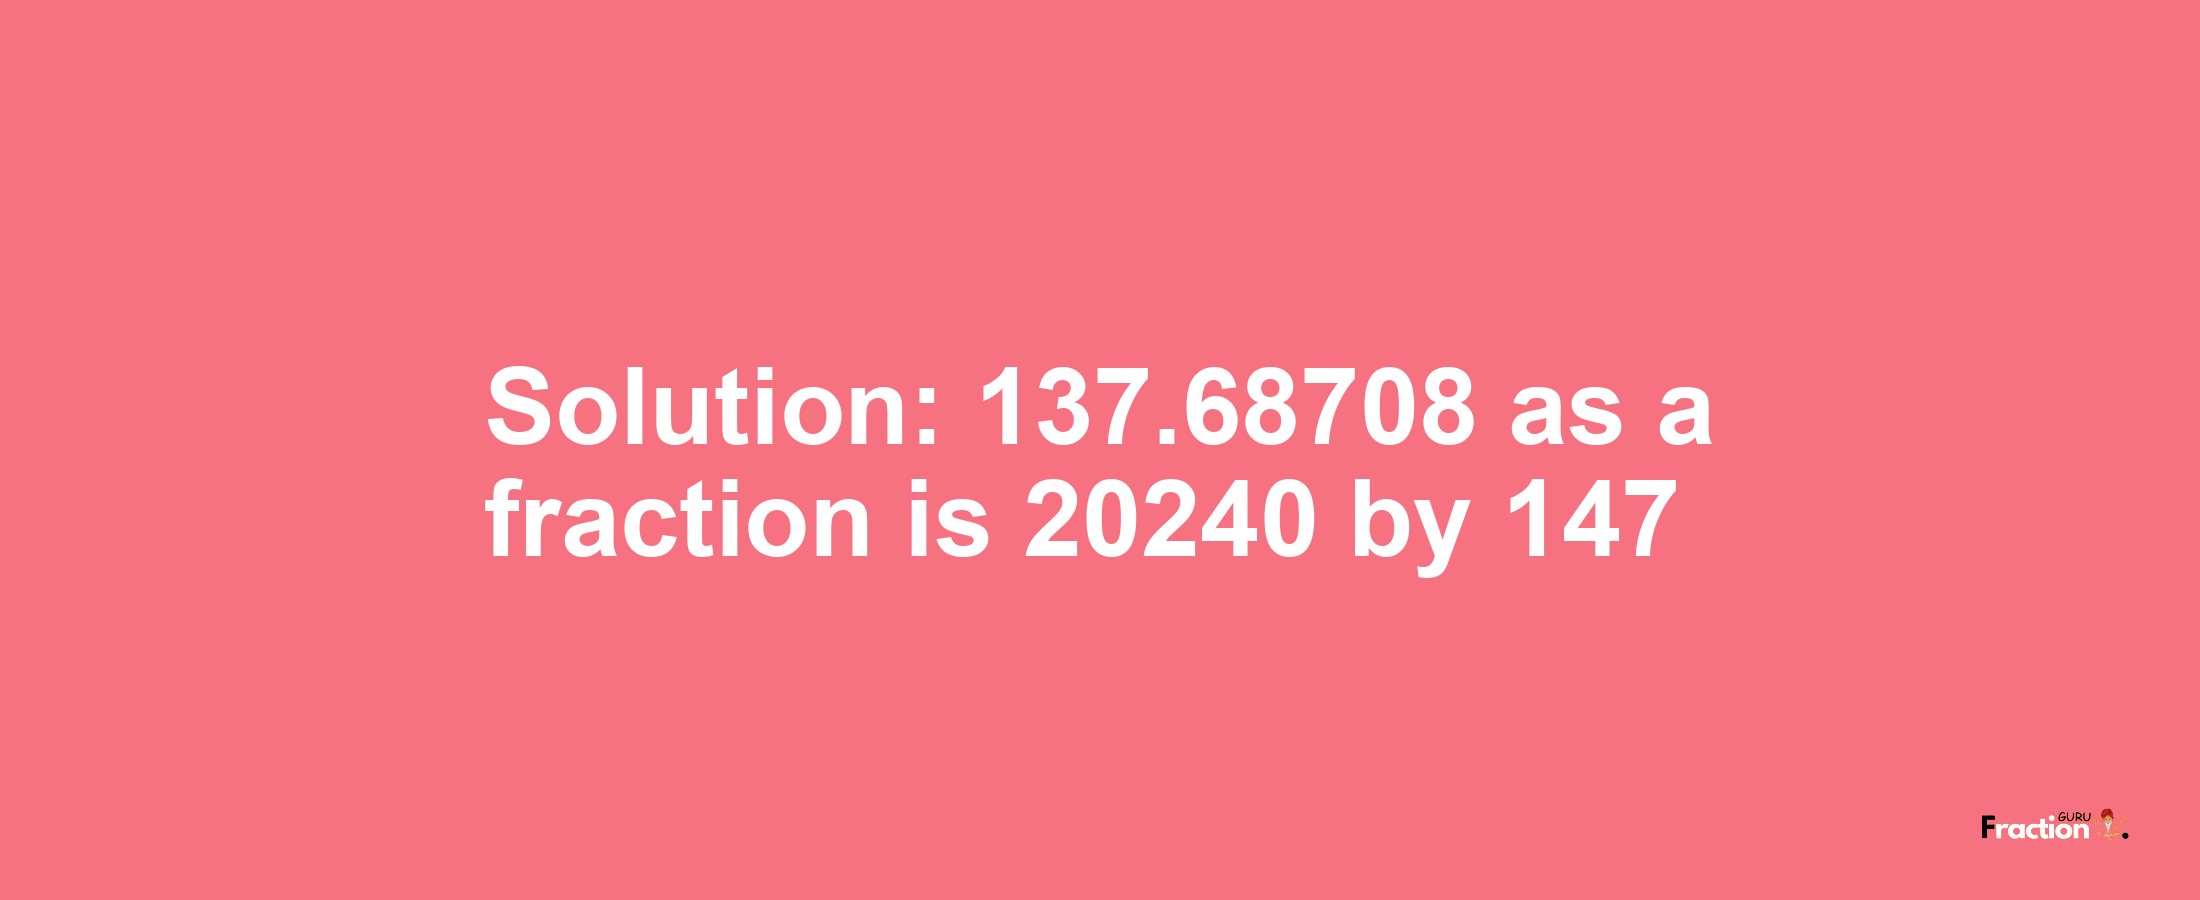 Solution:137.68708 as a fraction is 20240/147